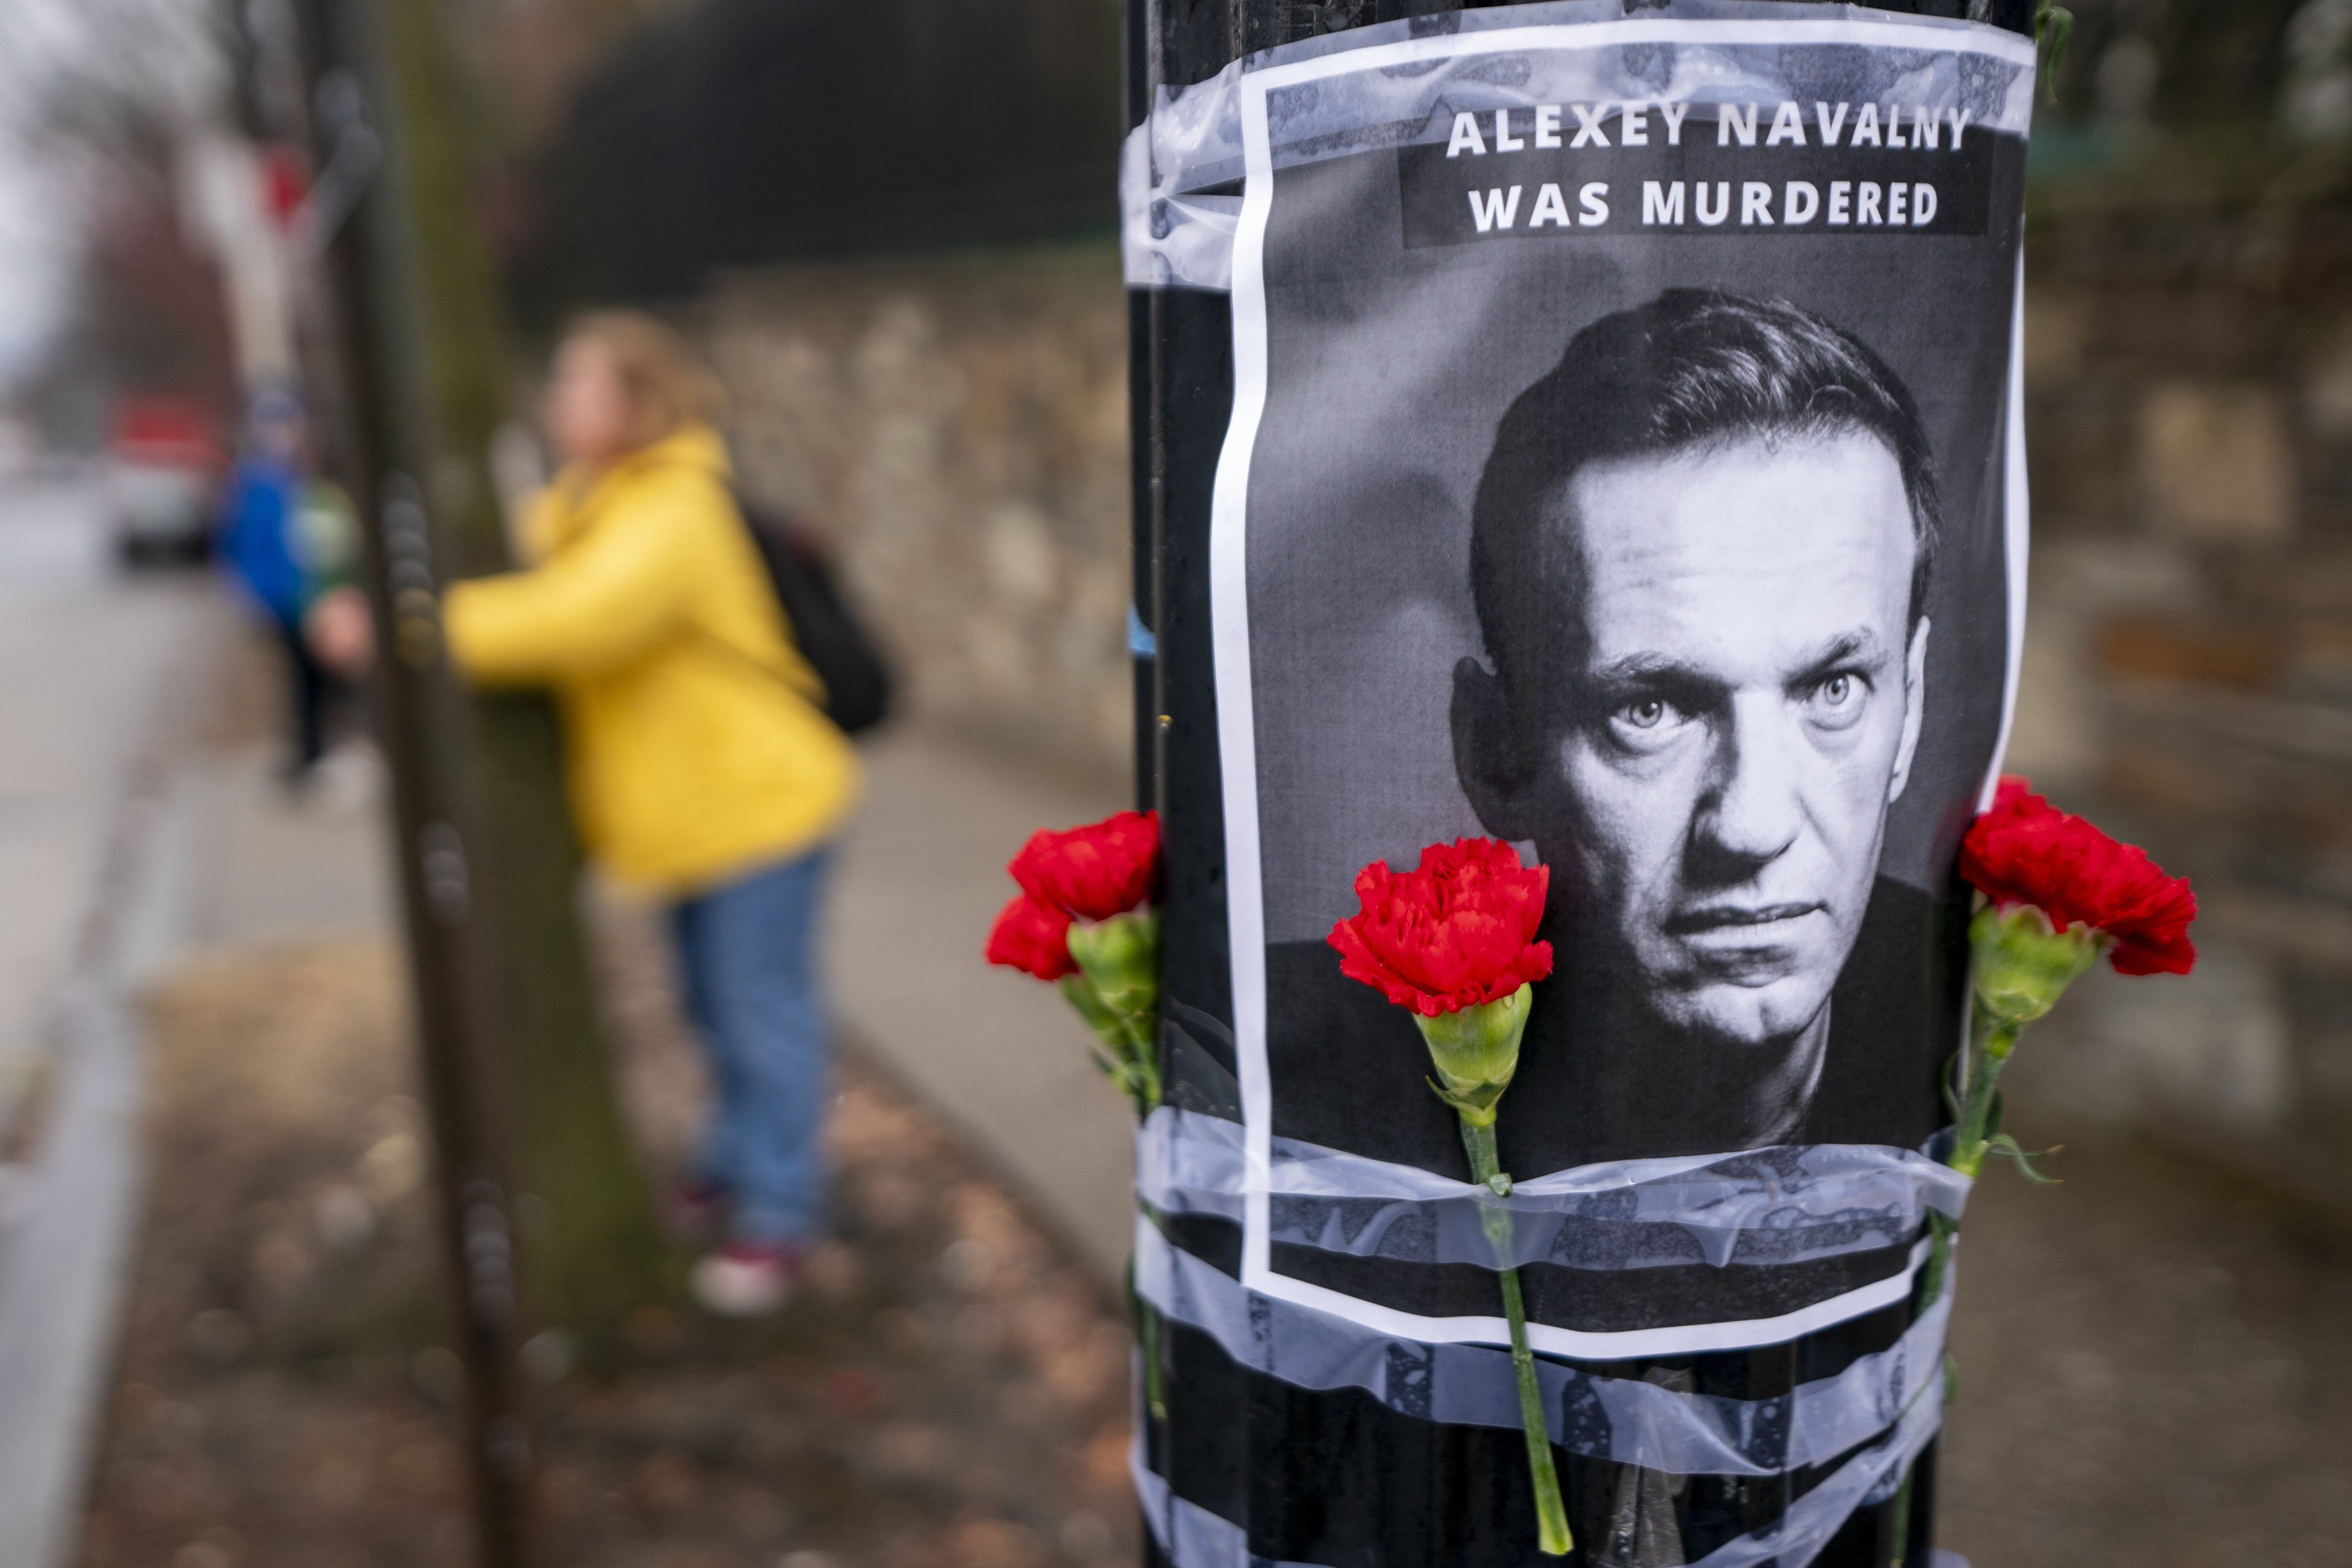 A Russian woman tends a memorial for Alexei Navalny outside the Russian Federation embassy in Washington on Friday. Photo: EPA-EFE